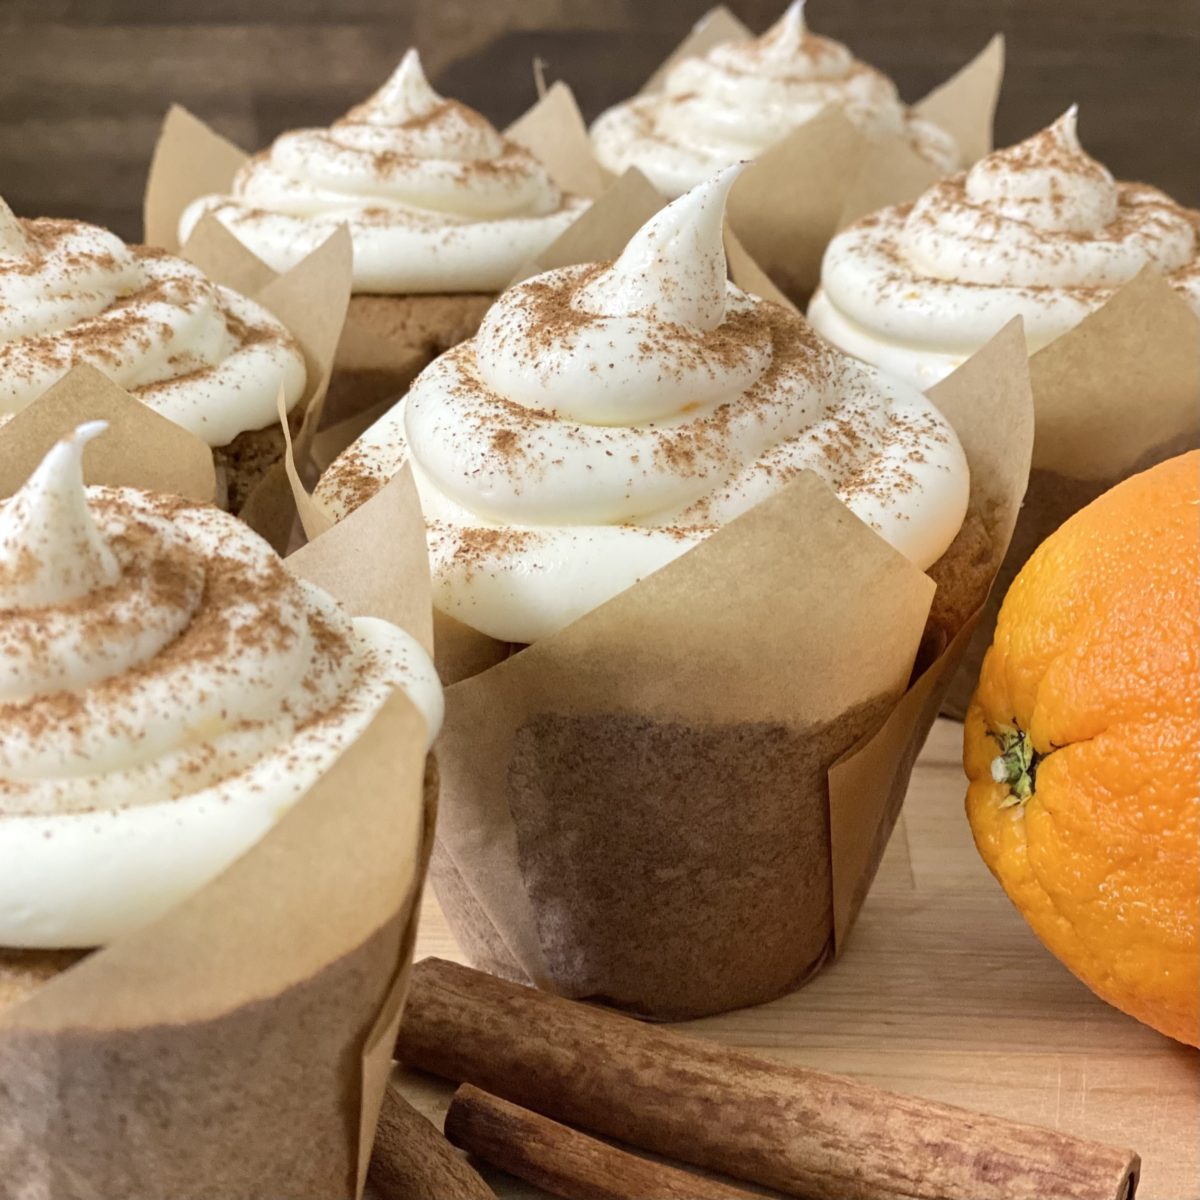 Orange Spice Cupcakes with Orange Cream Cheese Frosting sprinkled with ground cinnamon.